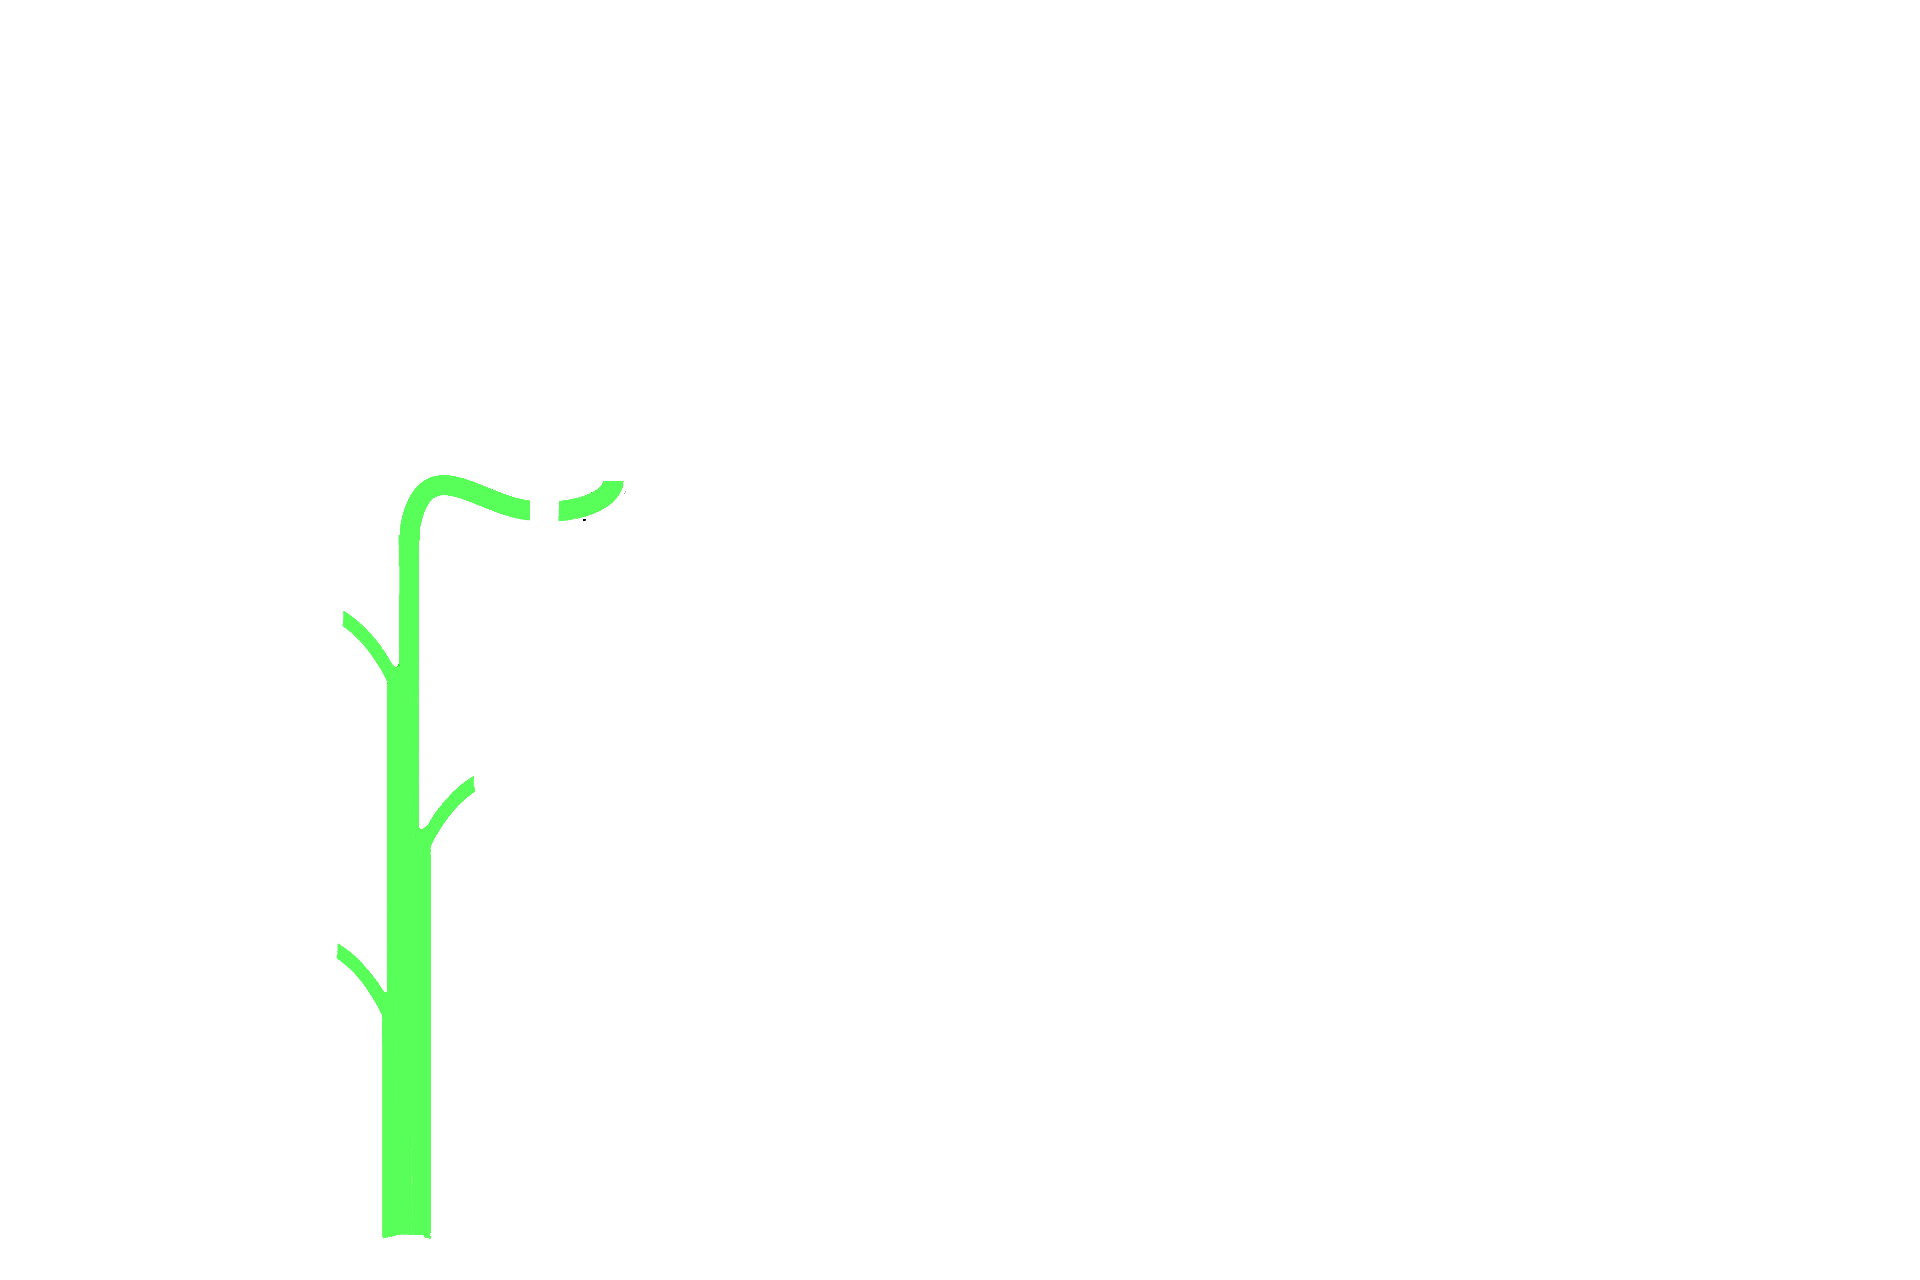 Collecting passageways > <p>Urine passes out of the nephron into a series of collecting tubules, which consist of connecting tubules, collecting ducts and papillary ducts.</p>
